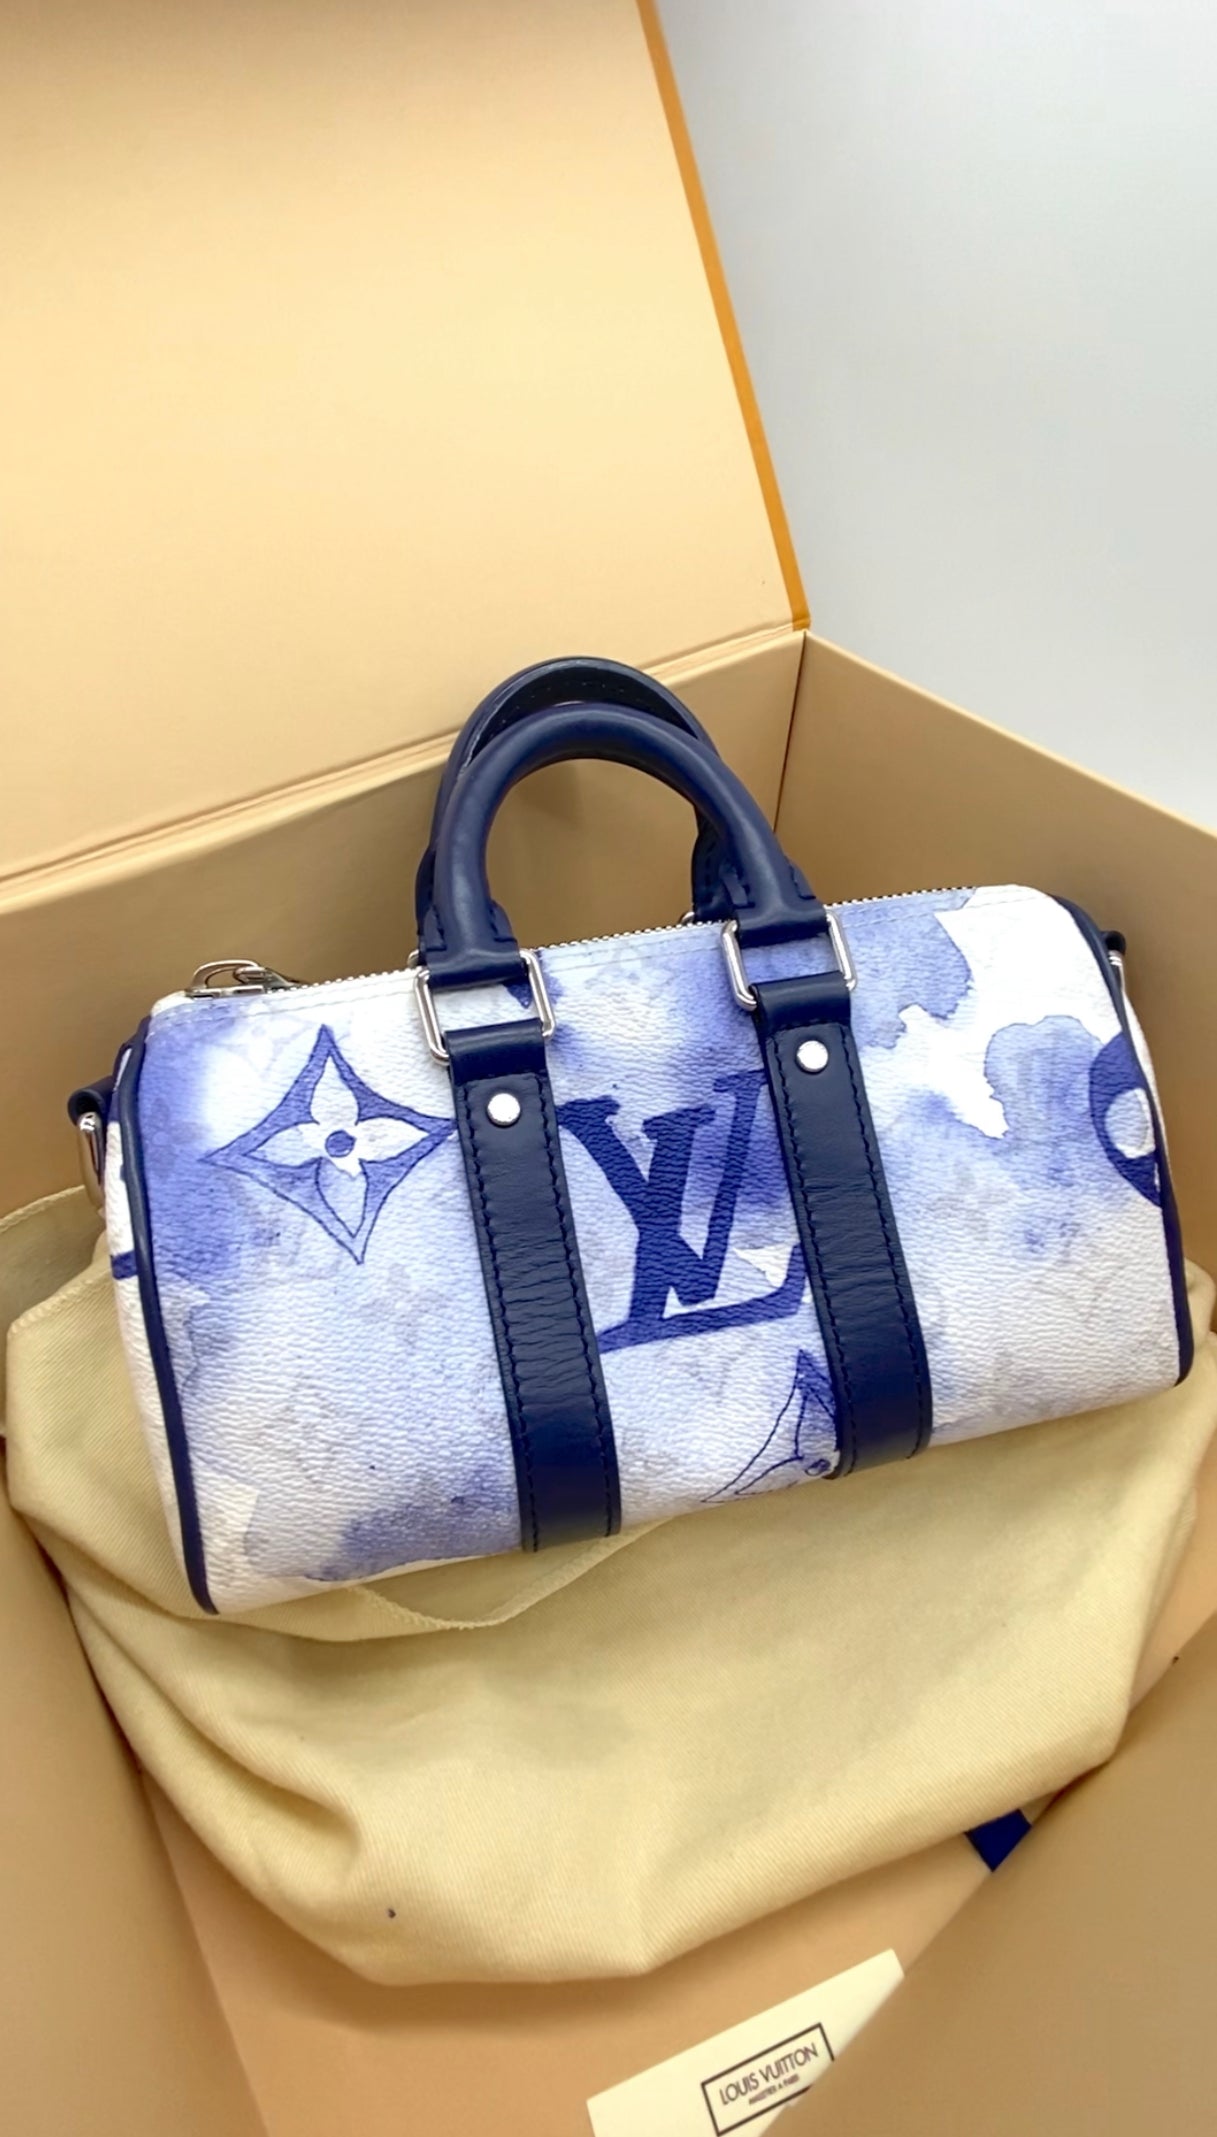 LOUIS VUITTON KEEPALL BANDOULIER BAG LIMITED EDITION MONOGRAM WATERCOLOR